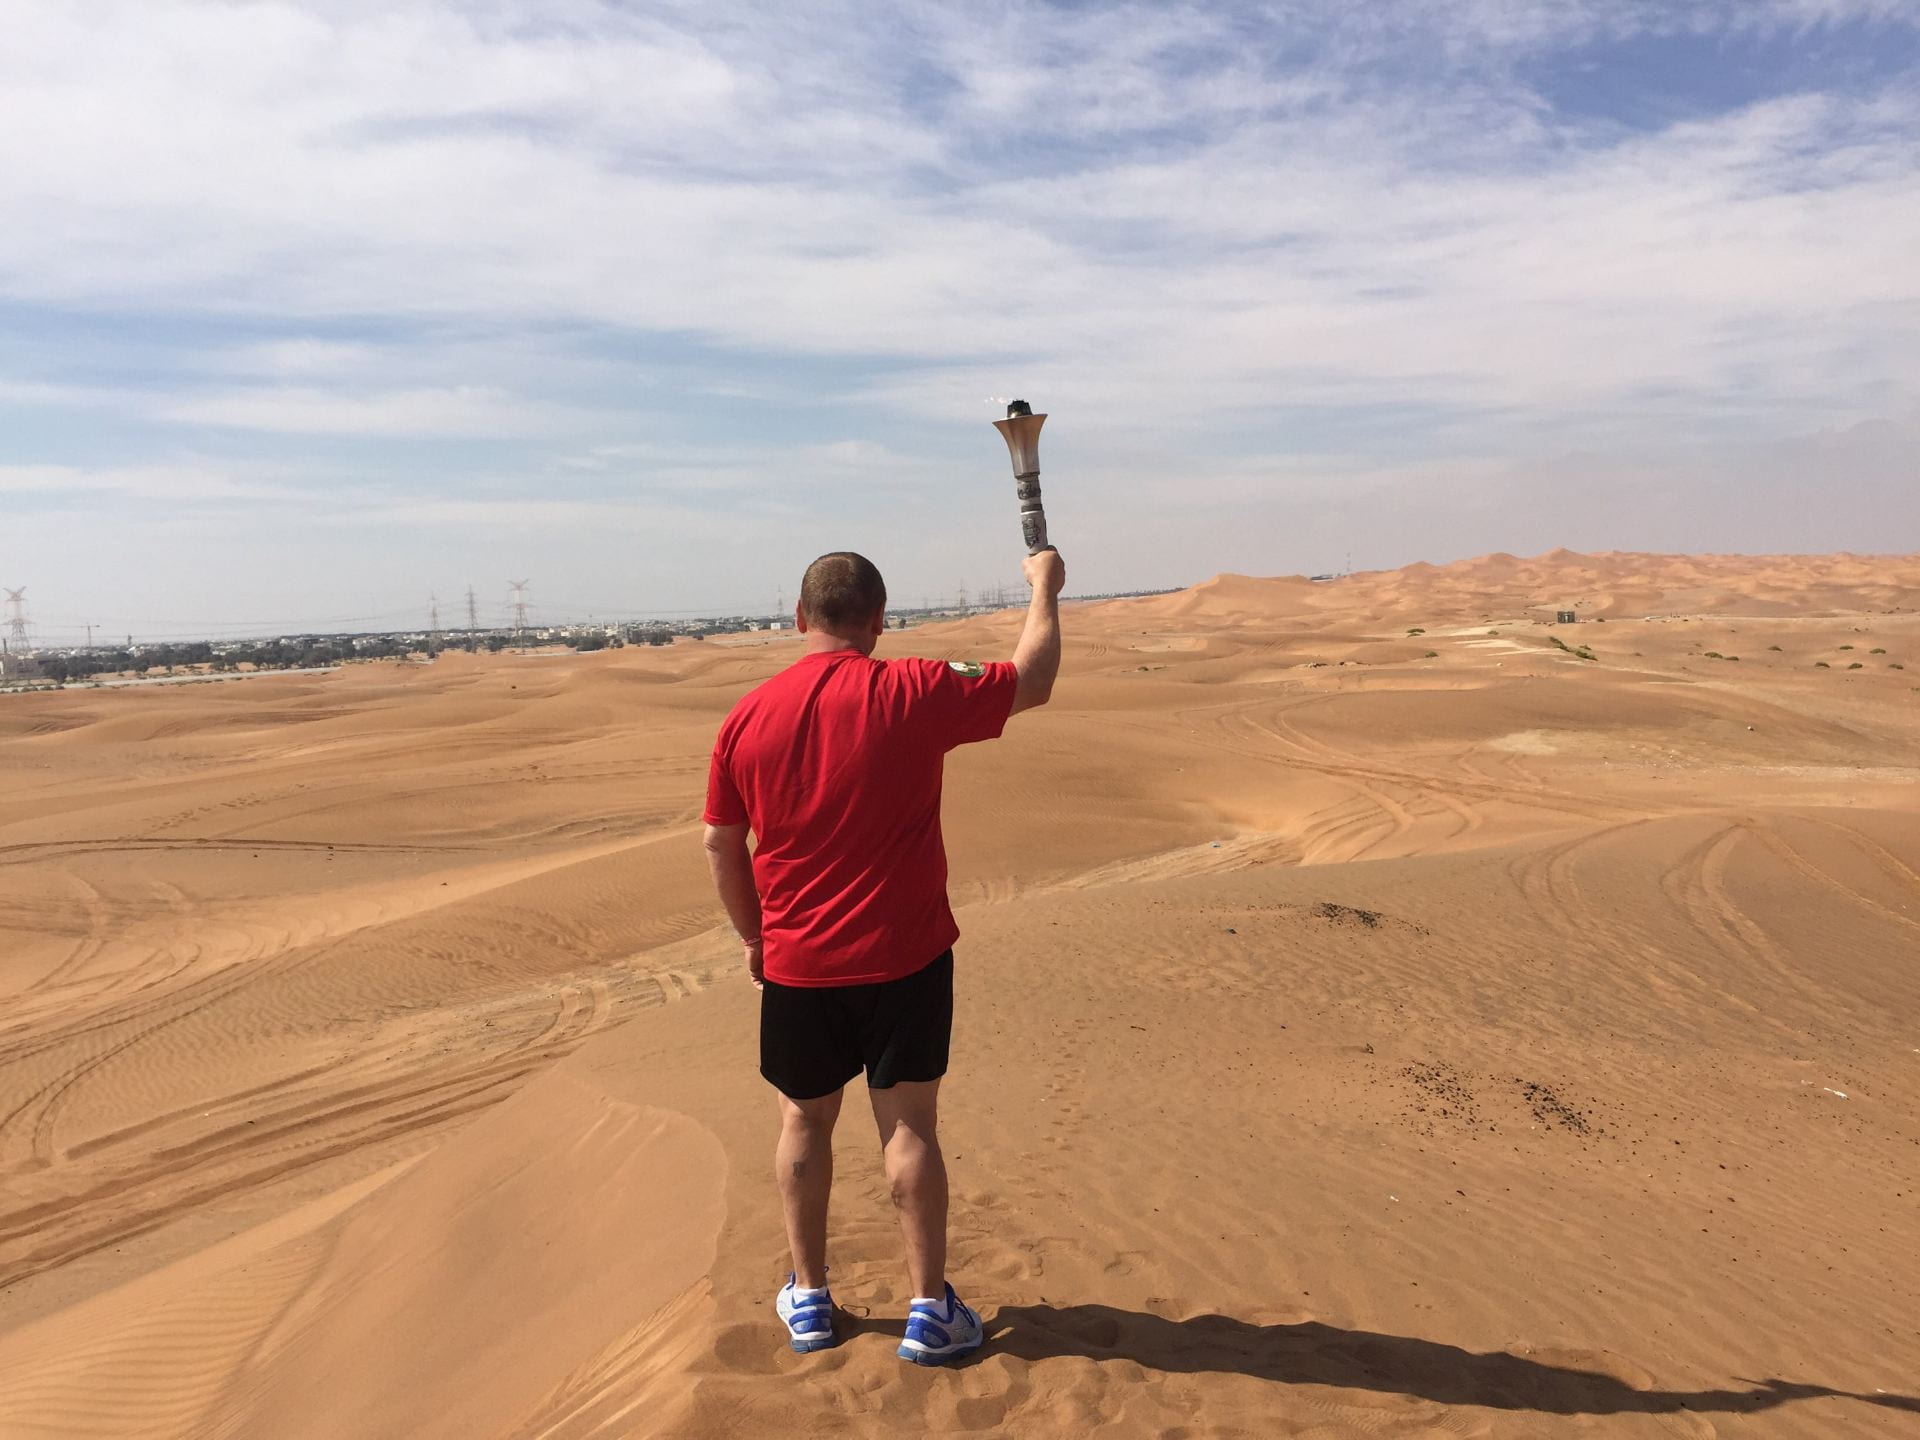 Scott Teal stands in the middle of a desert, wearing a red shirt. With his back to the camera, he holds us the Olympic Torch he will carry during the Law Enforcement Torch Run.